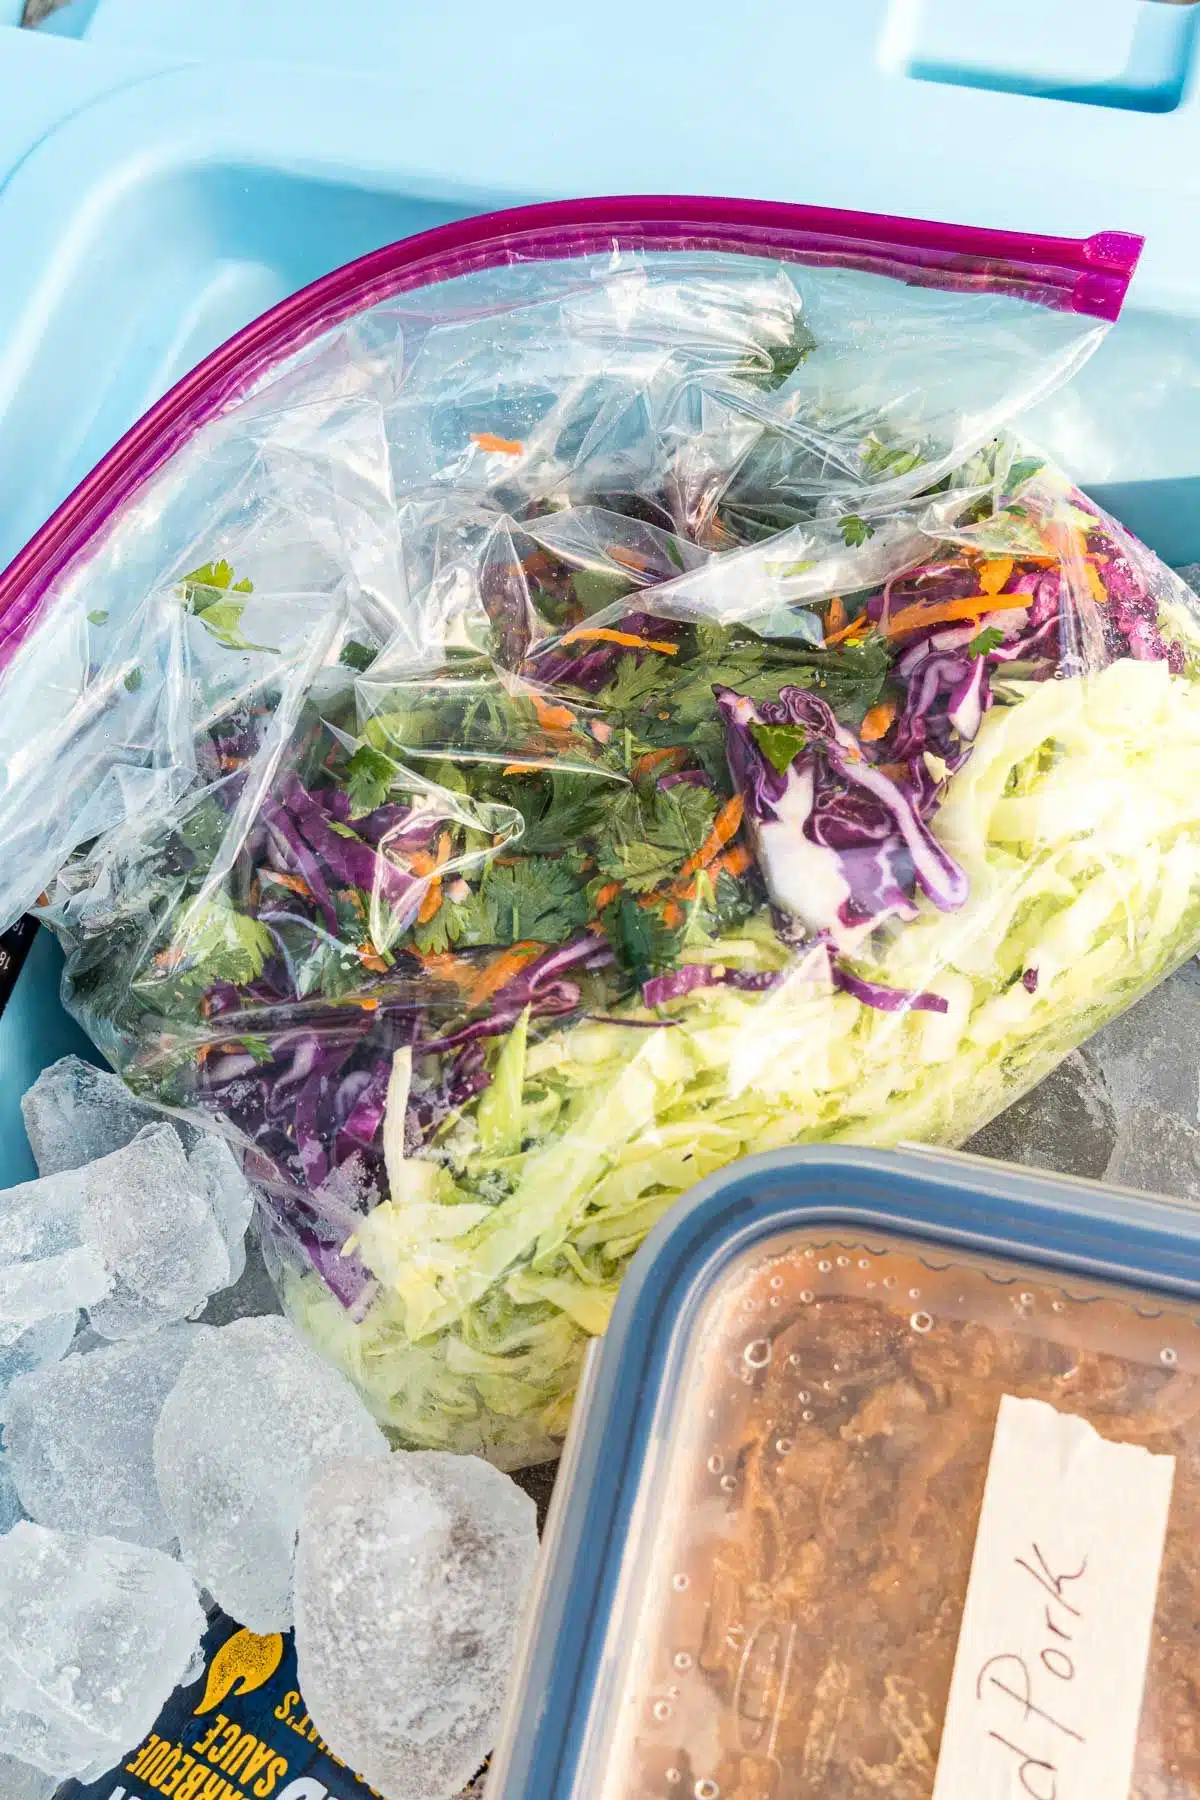 A bag of coleslaw in a cooler of ice.